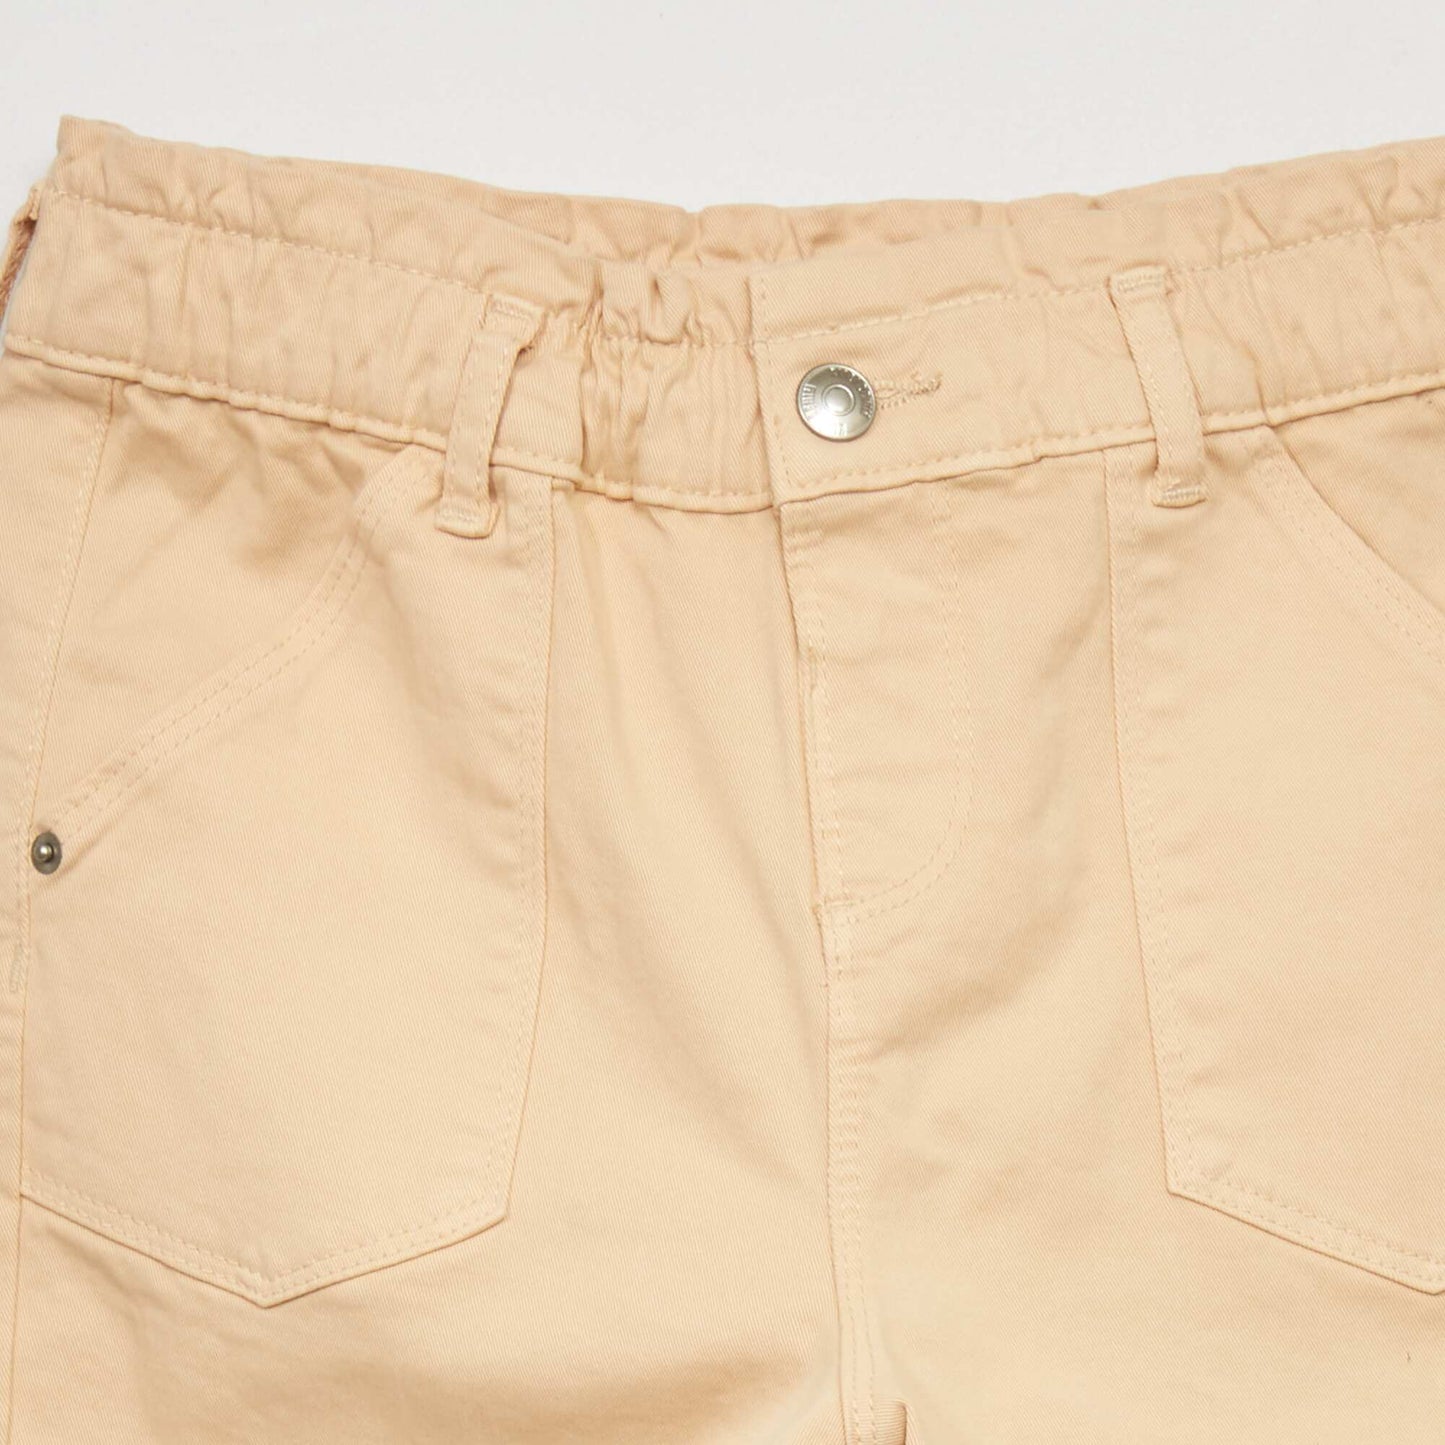 Paper bag trousers with pockets YELLOW